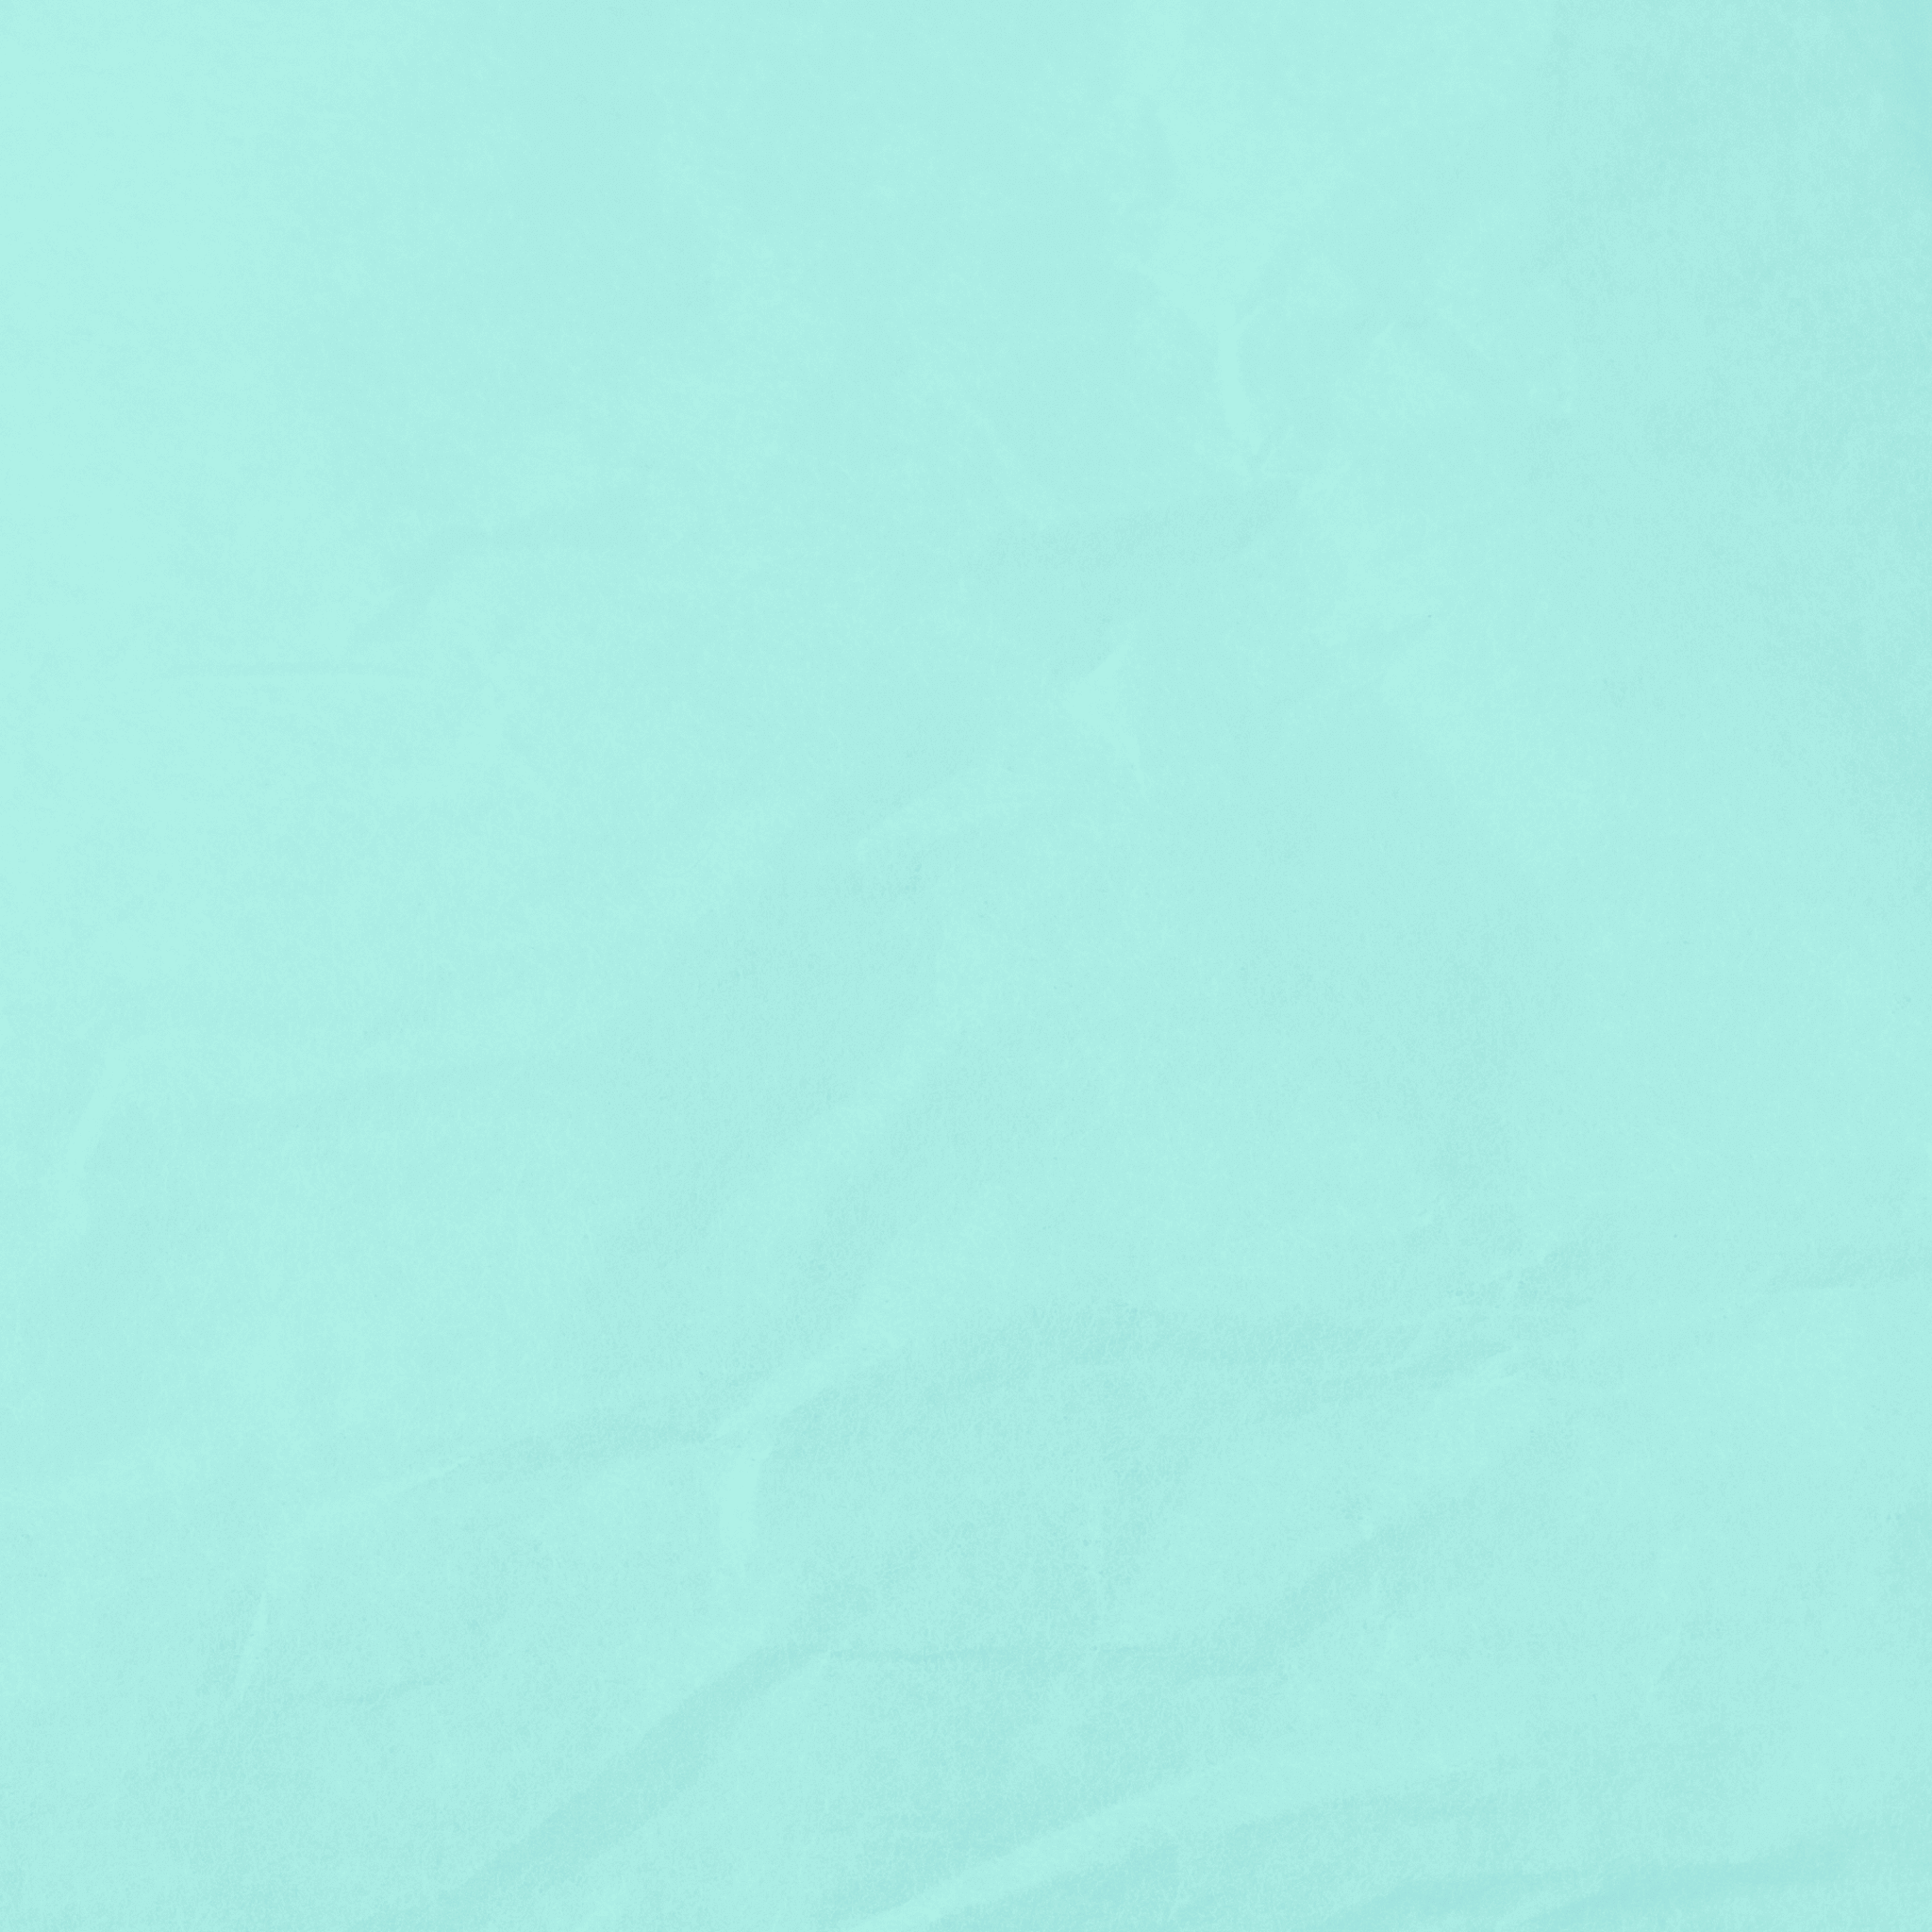 Mint Green Images  Free Photos, PNG Stickers, Wallpapers